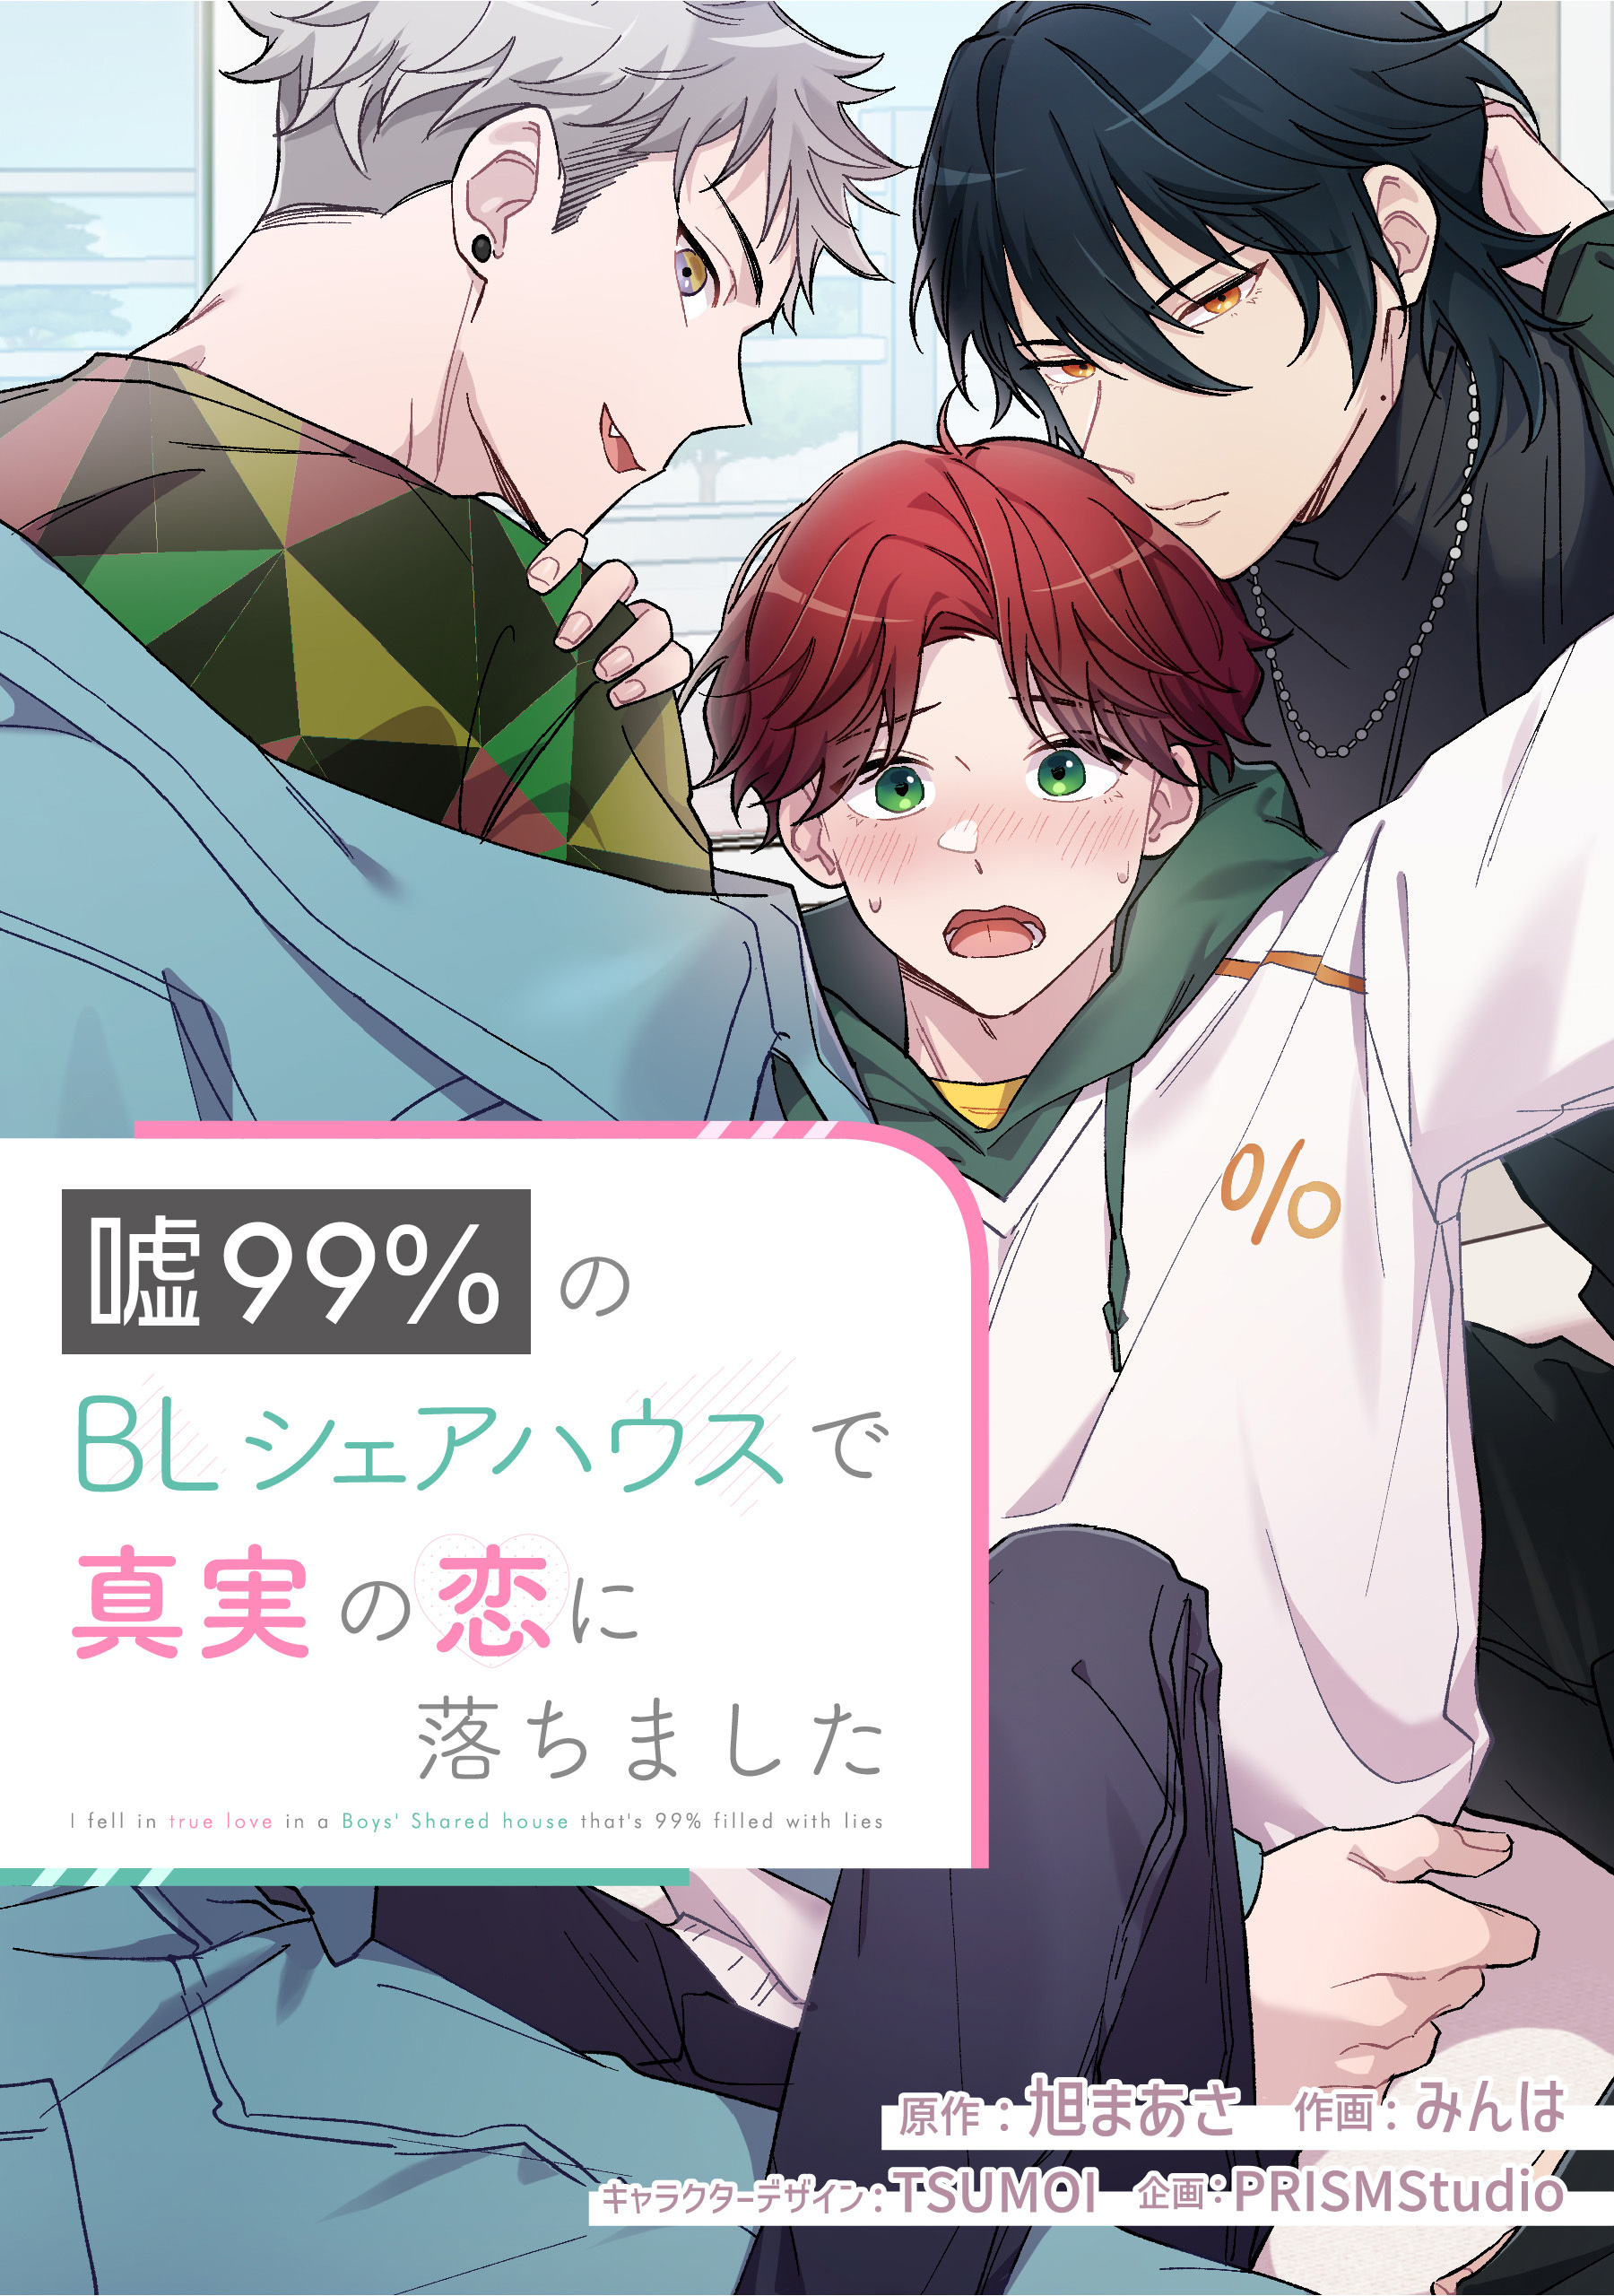 I fell in true love in a Boys' Sharehouse that's 99% filled with lies thumbnail